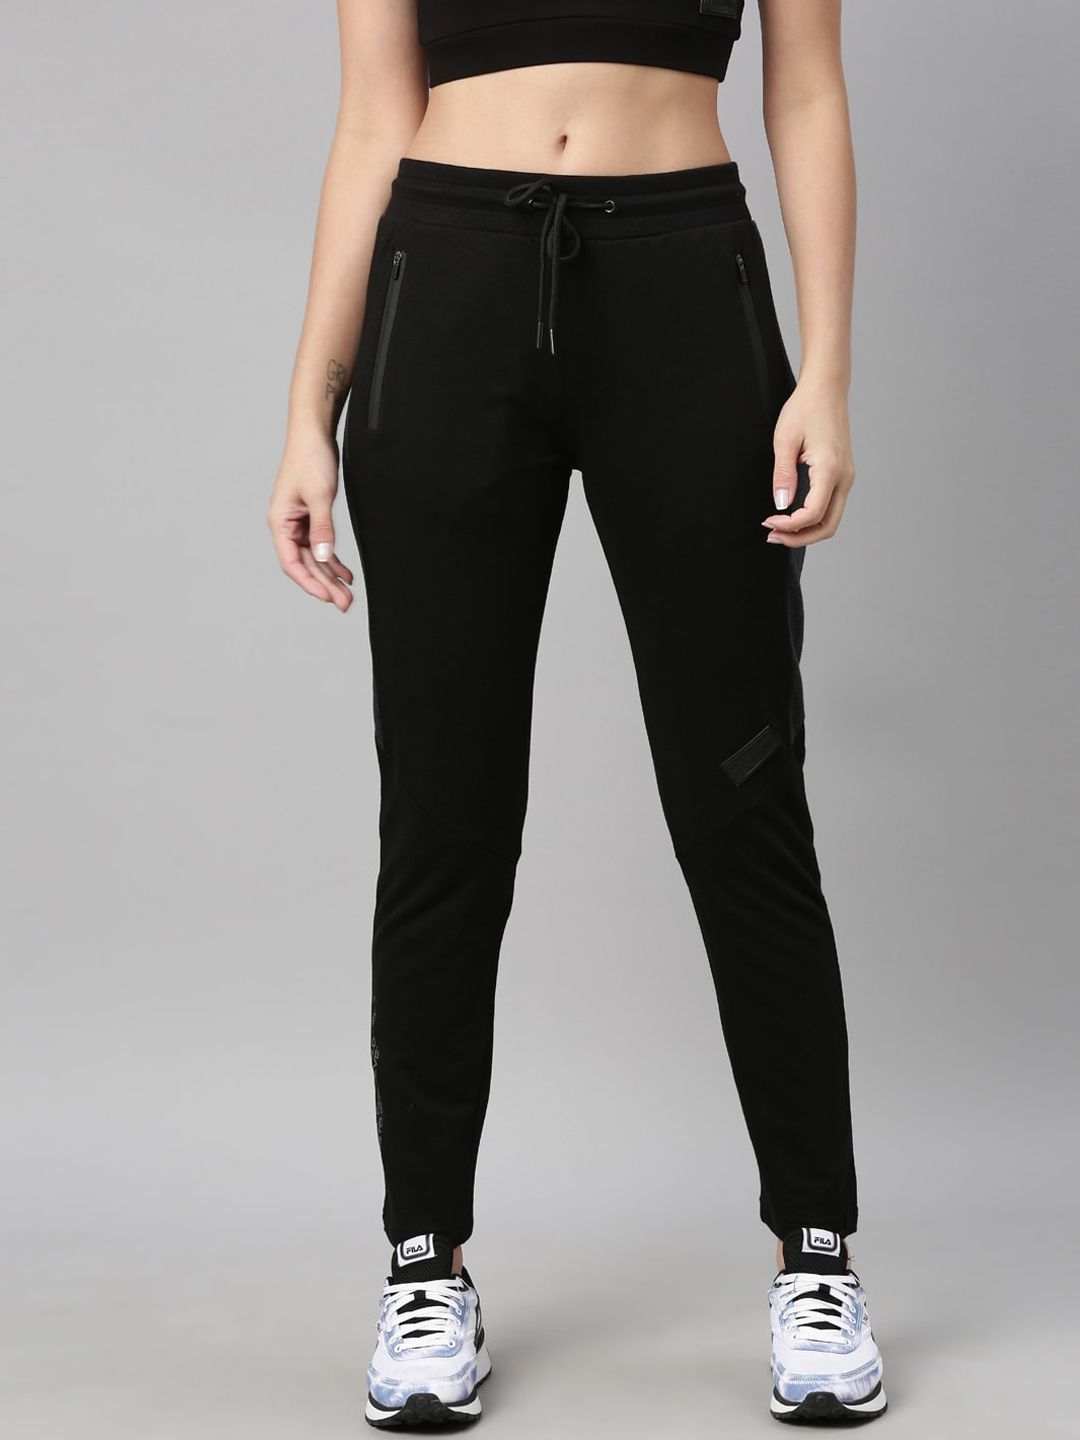 FILA Women Black Solid Cotton Track Pants Price in India